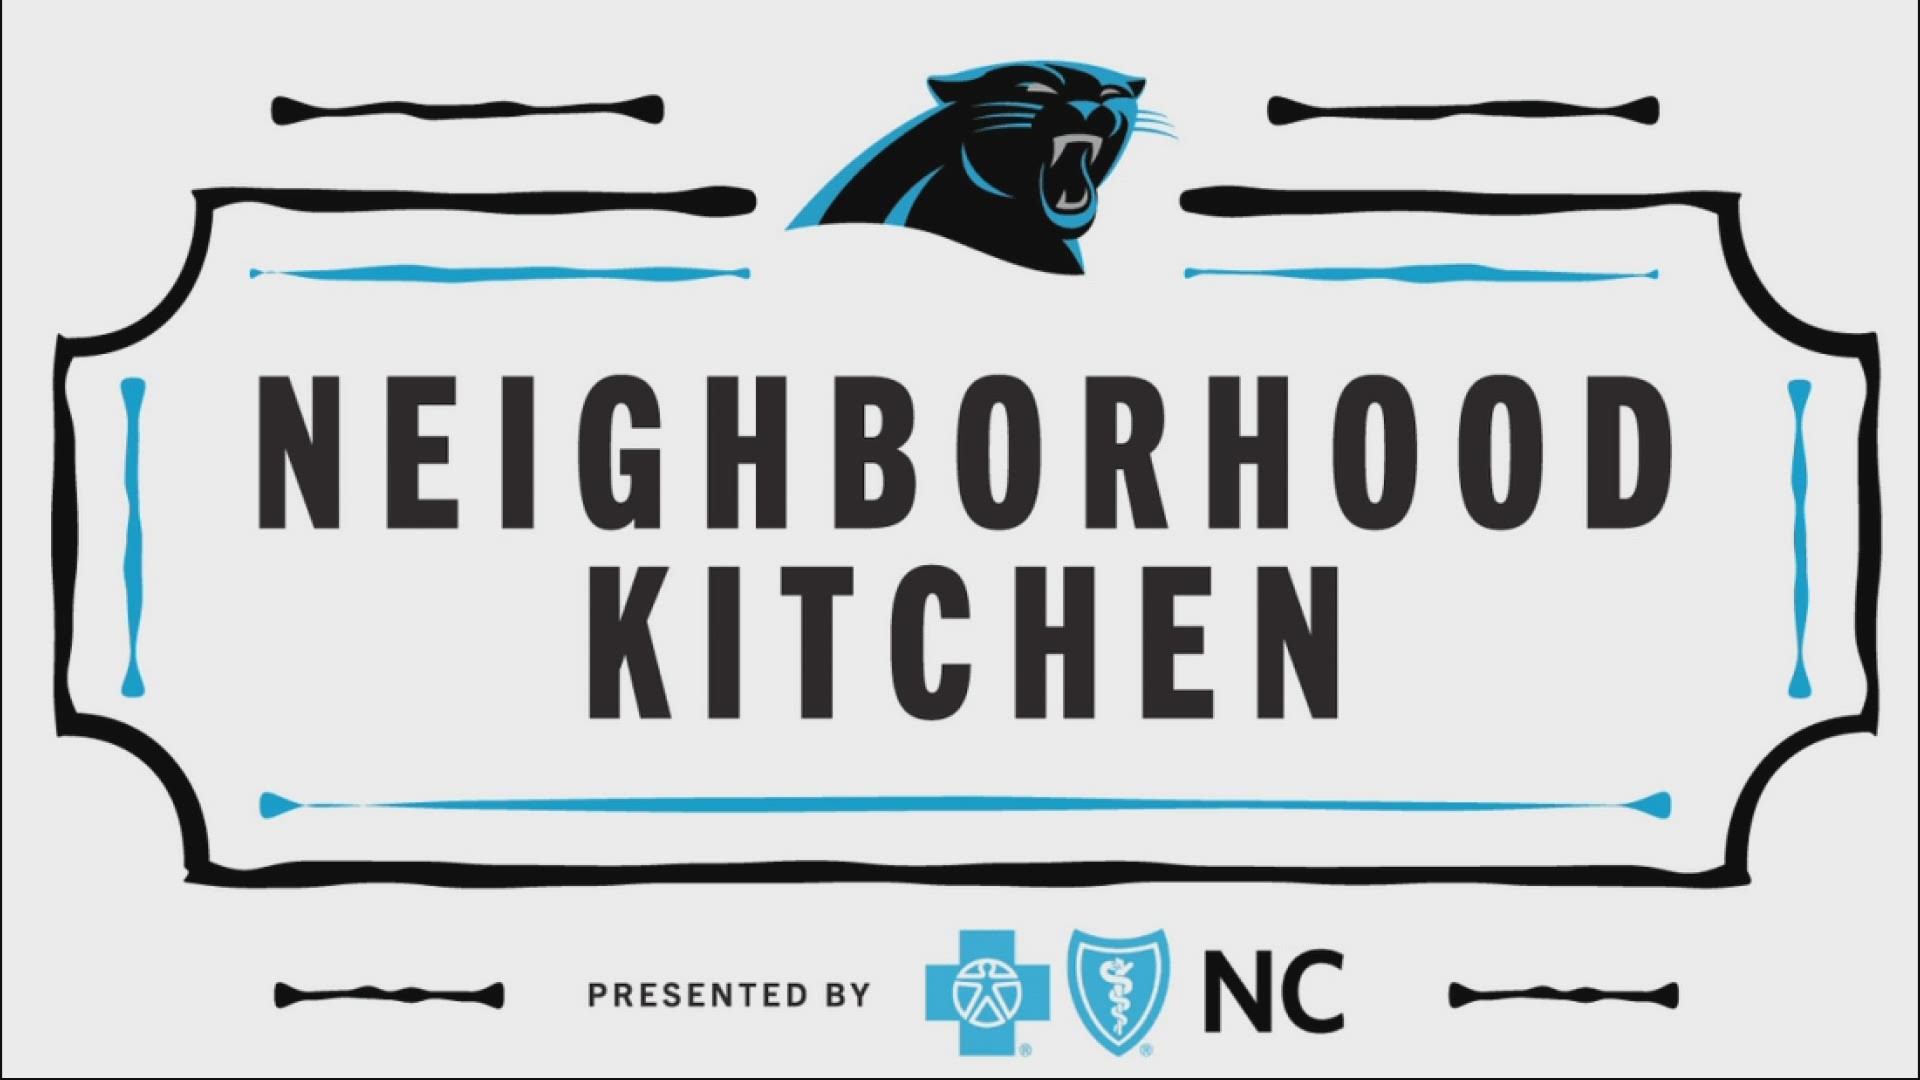 The Panthers are teaming up with Blue Cross Blue Shield to provide over 300 meals to the underserved in the Charlotte community.